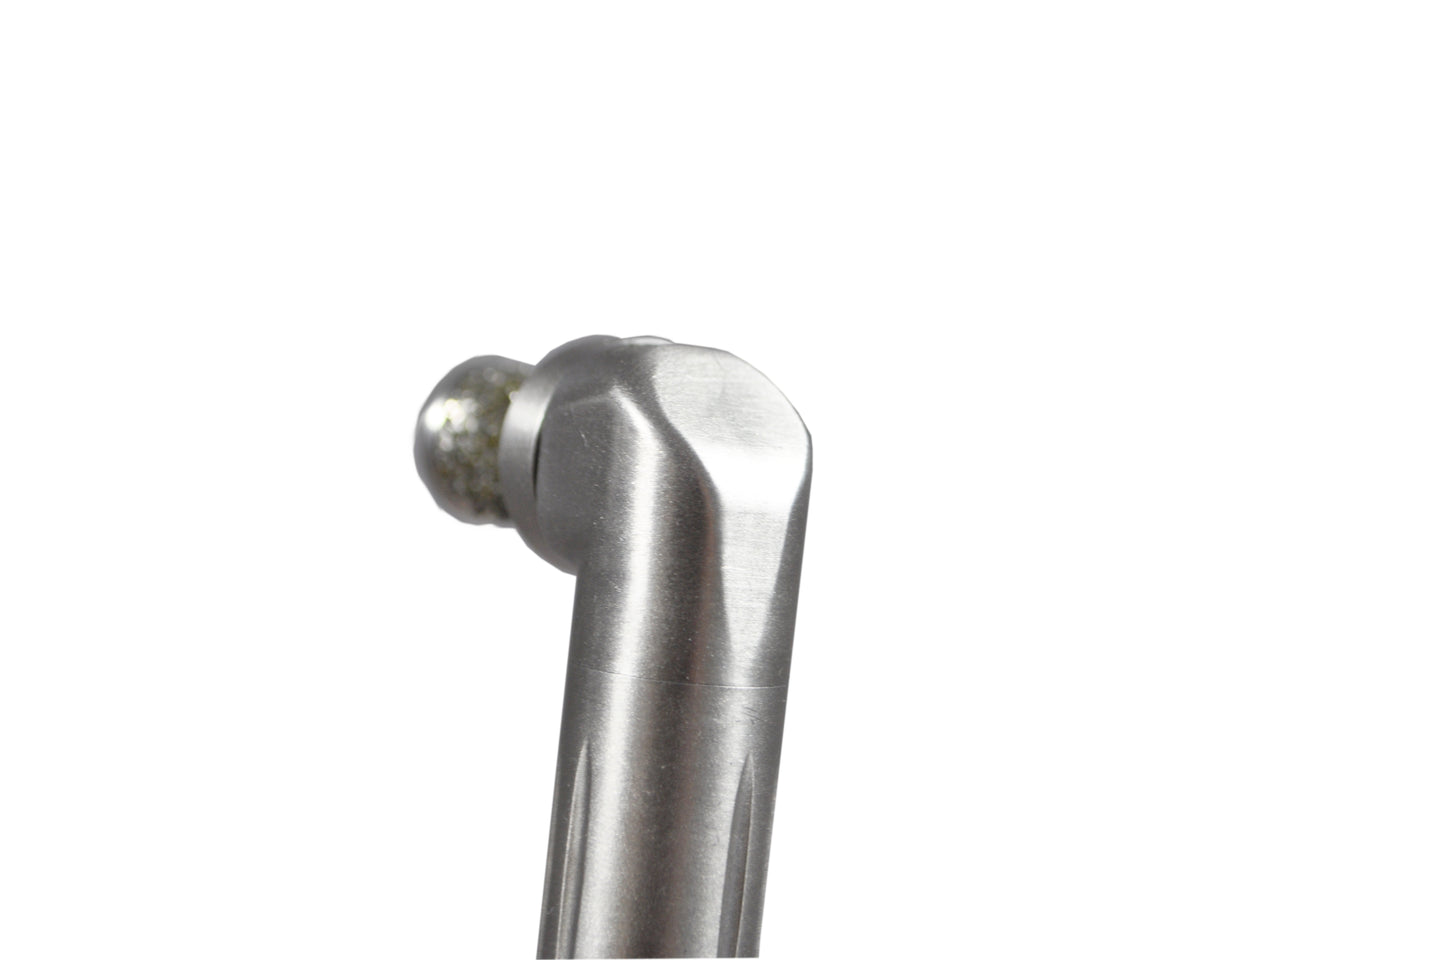 Compact Polyfloat Straight (without burr) - Stainelss Steel or Polymer handle